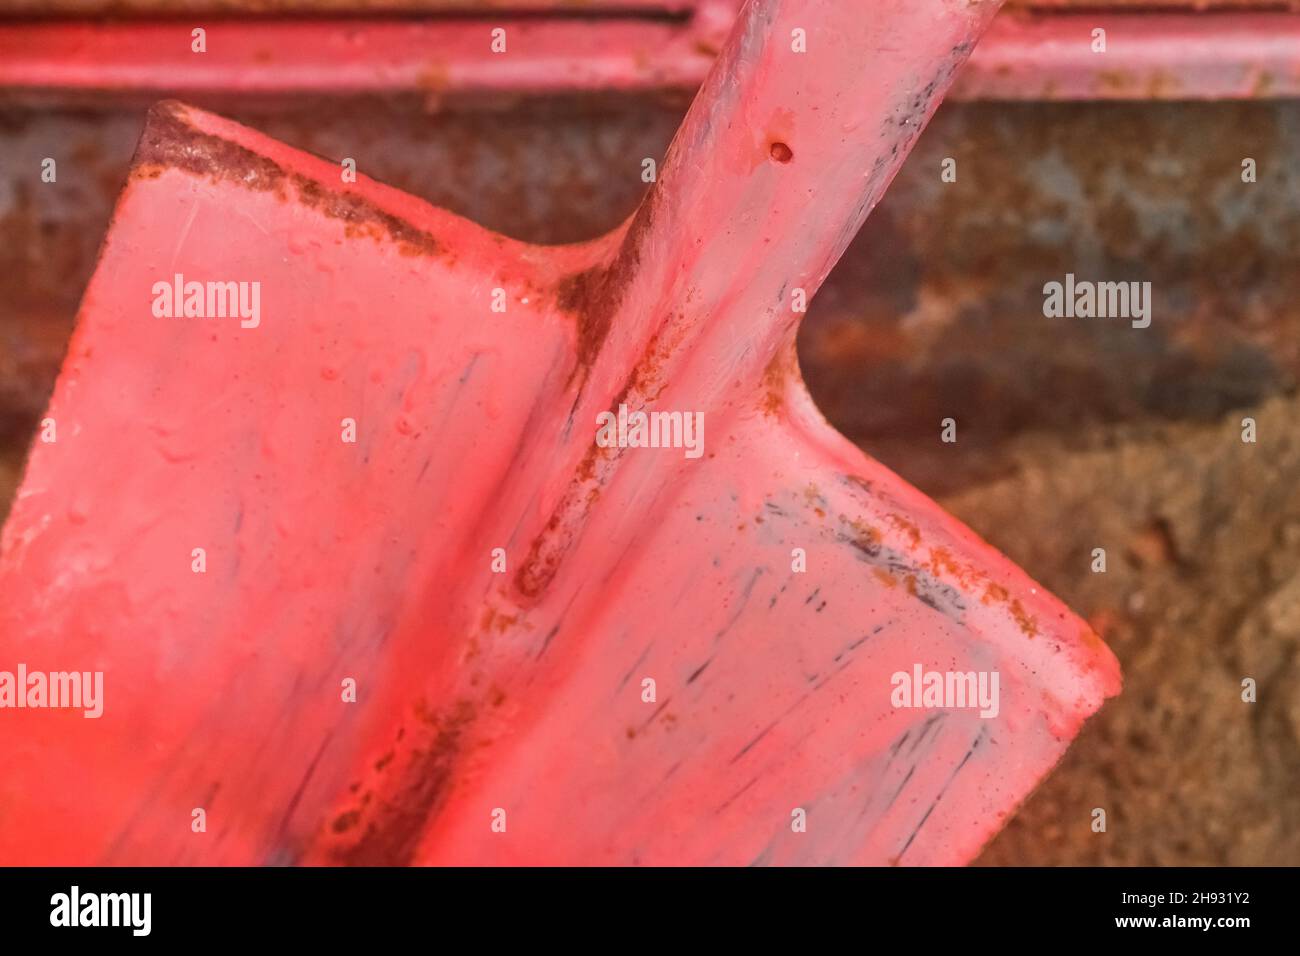 Old red fire shovel equipment and tools to help safely extinguish fire. Stock Photo